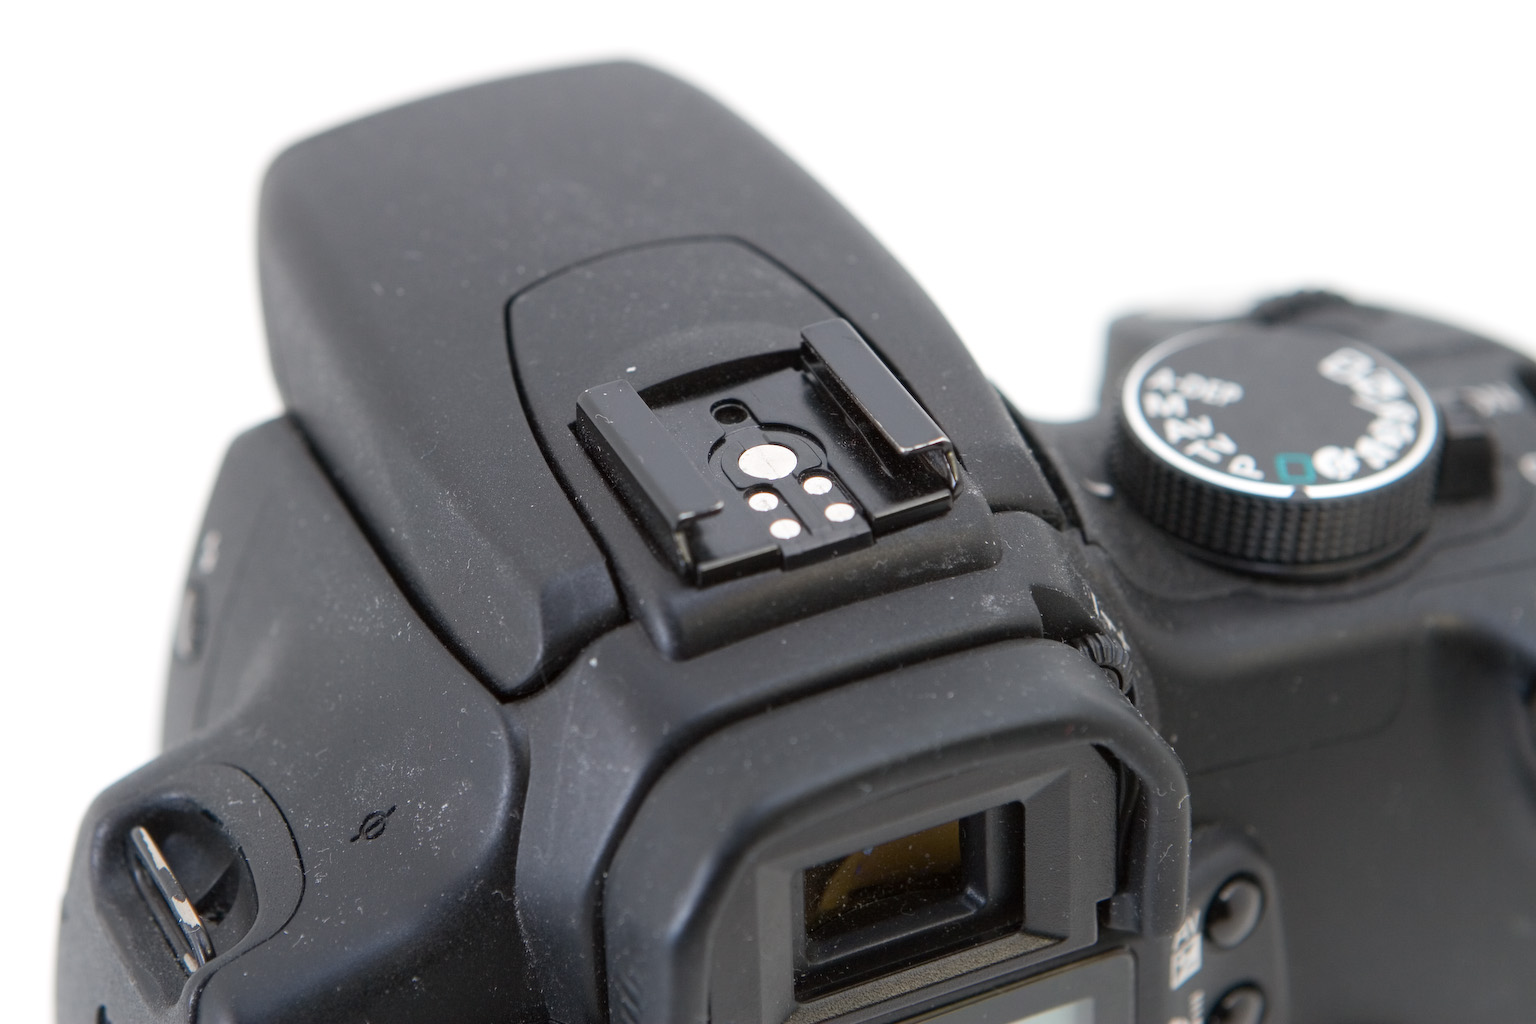 the front and side of a black digital camera